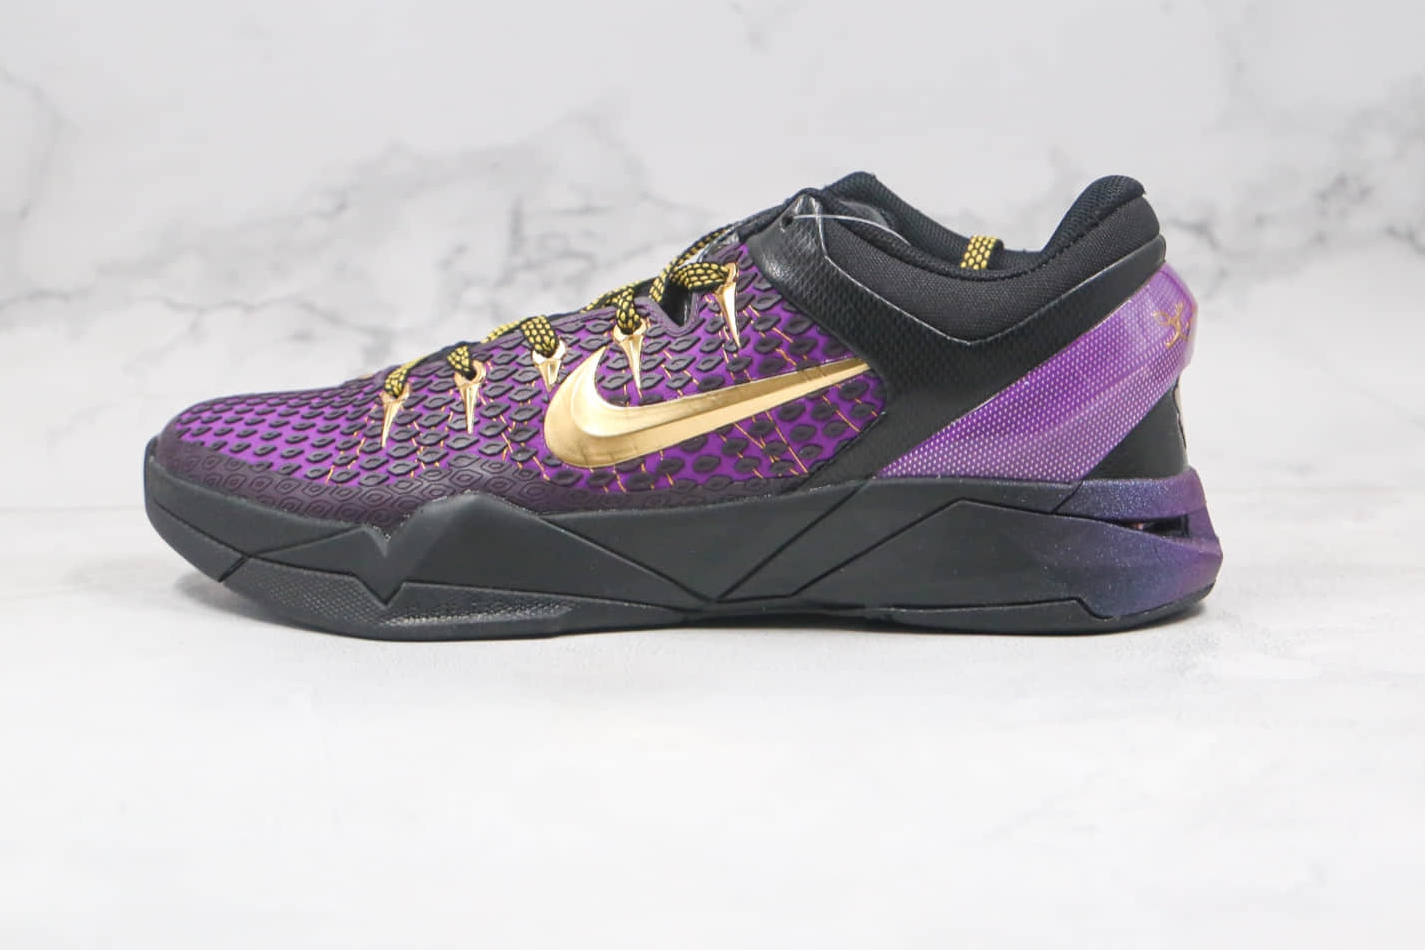 Nike Zoom Kobe 7 VII Black Purple Gold Basketball Shoes 511371-005 - Buy Online at Competitive Prices